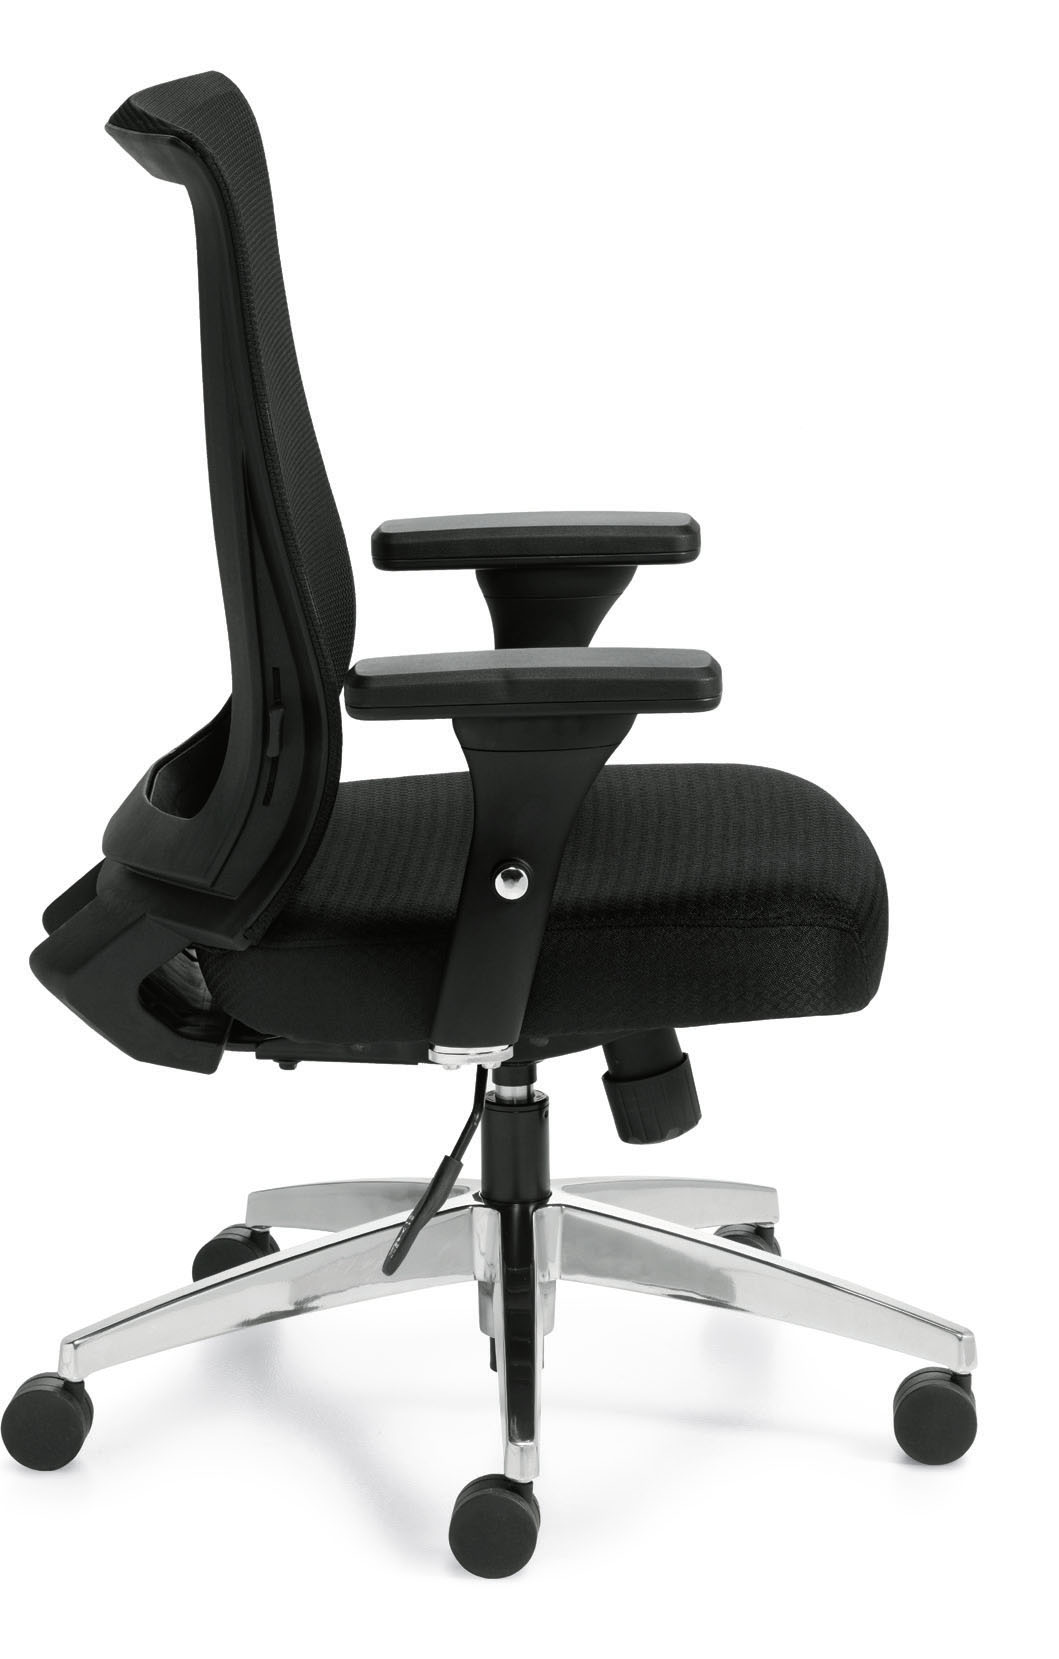 Offices To Go™ Mesh Back Managers Chair, OTG11325B